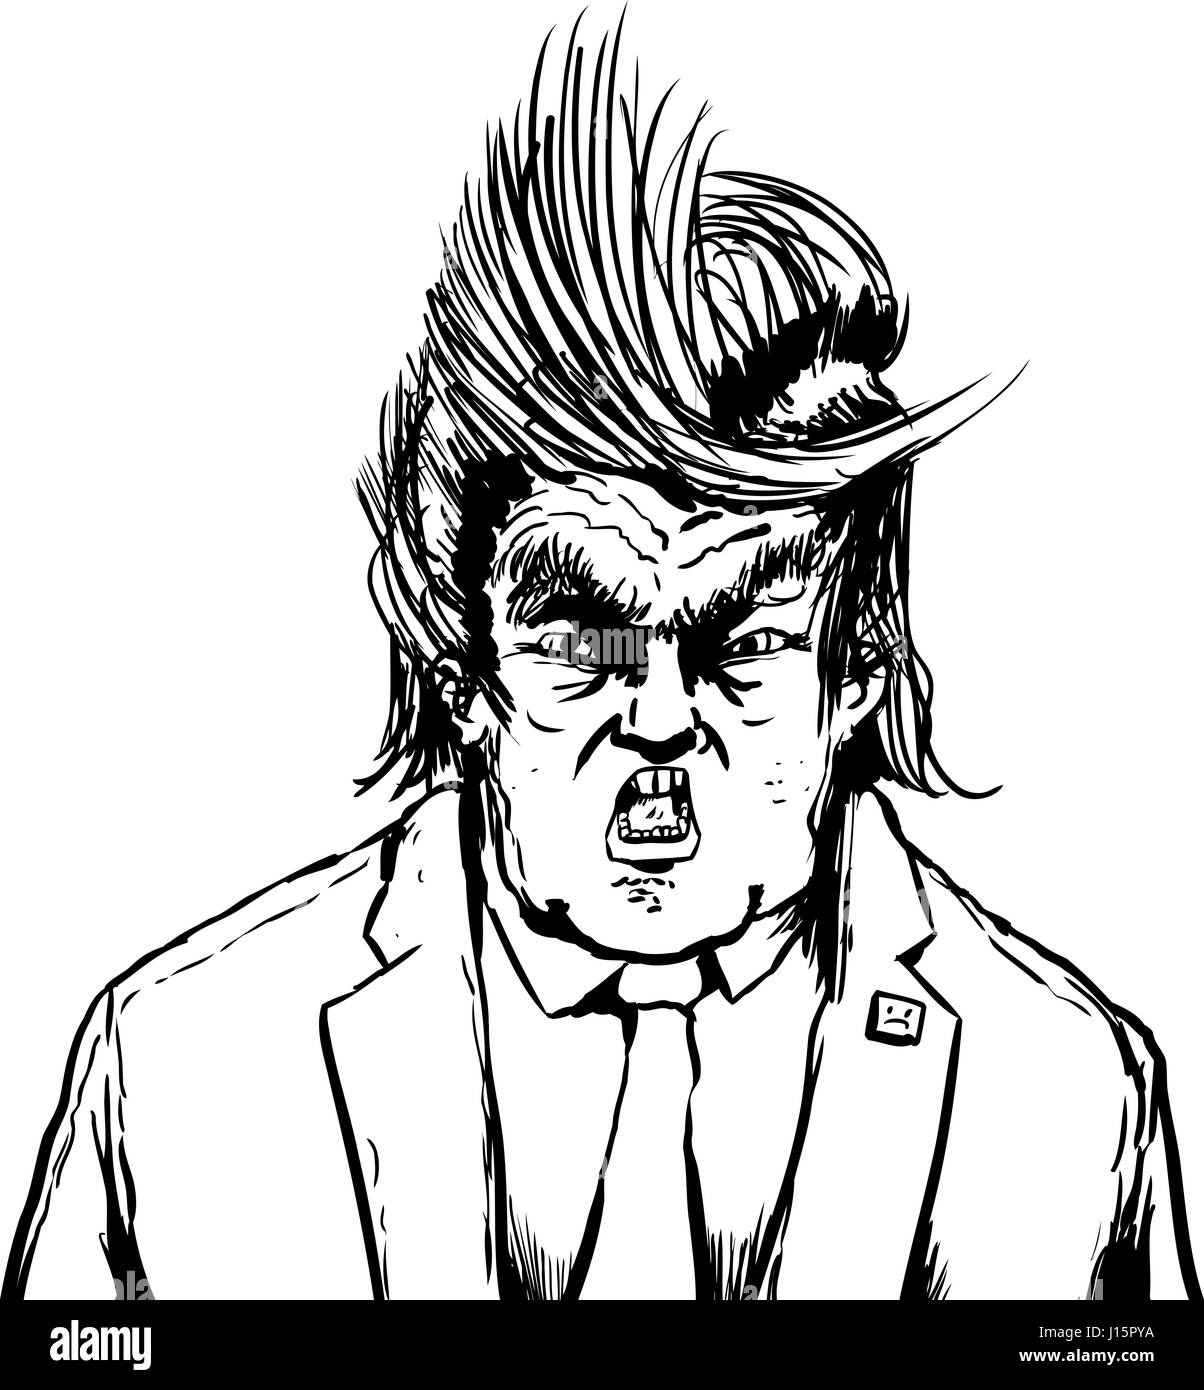 April 18, 2017. Outline cartoon of Donald Trump in weird parted hairdo and yelling Stock Photo